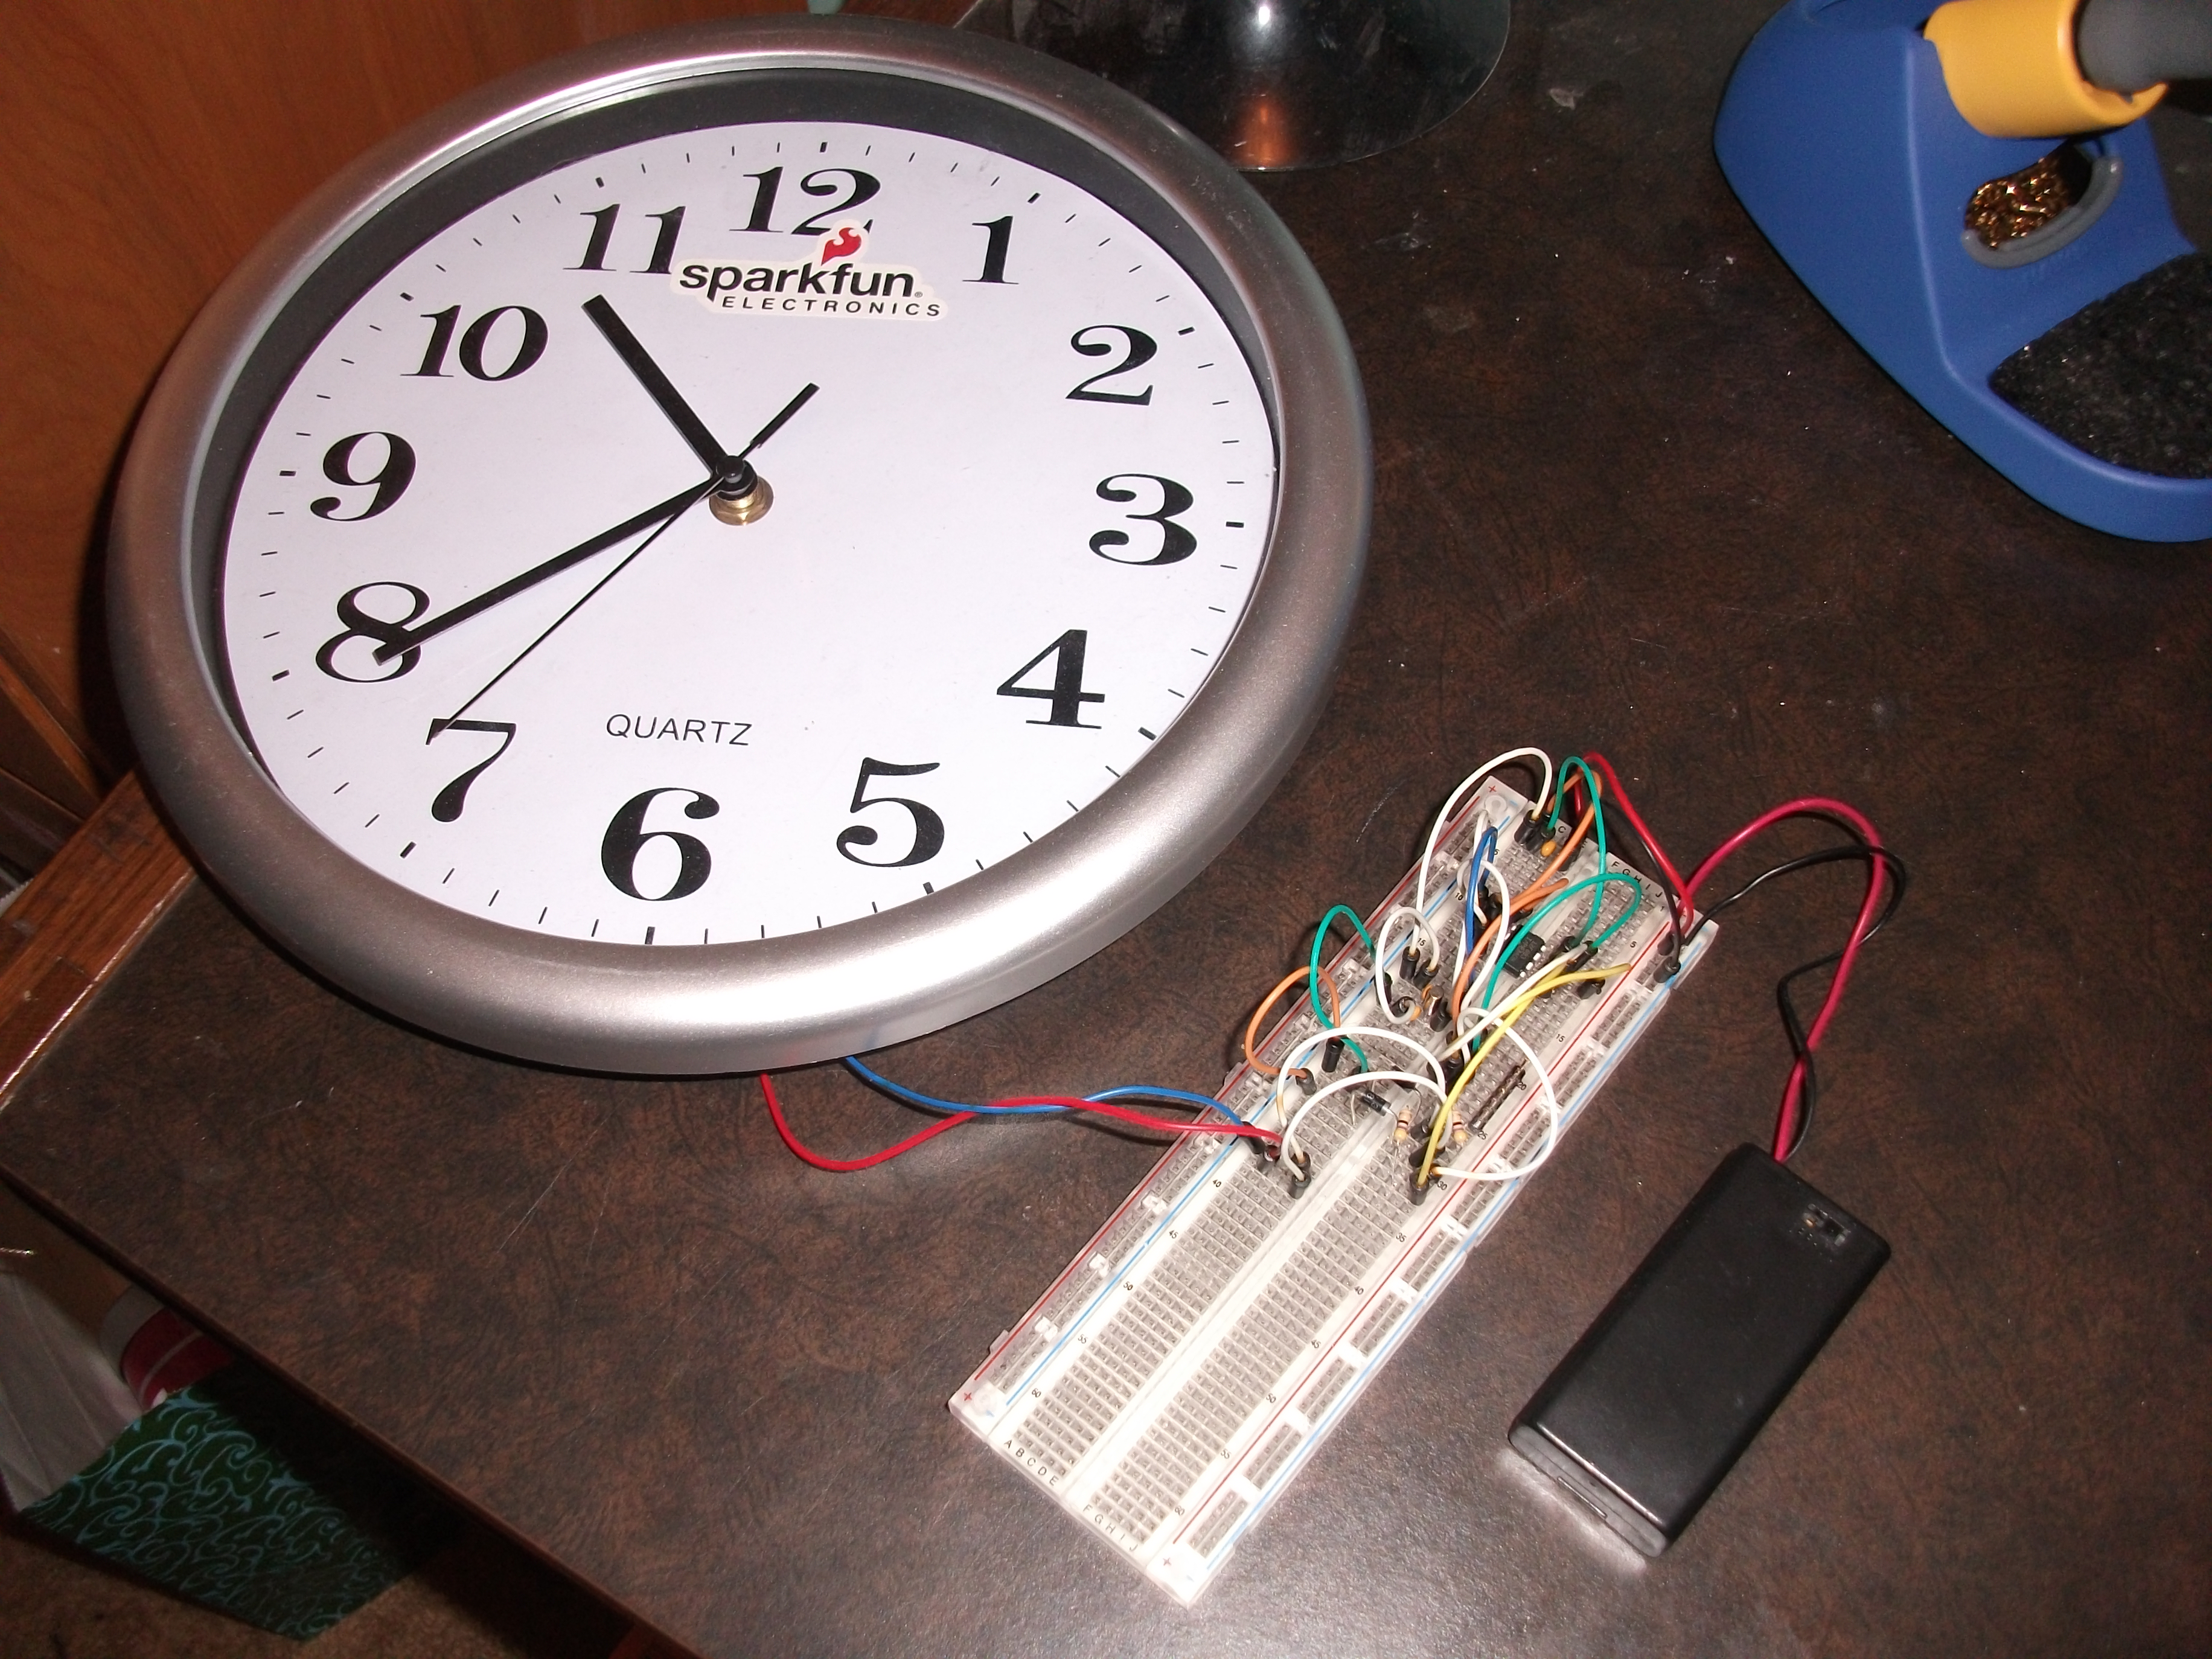 The original clock used with the arduino, now being run by the same circuit on a breadboard